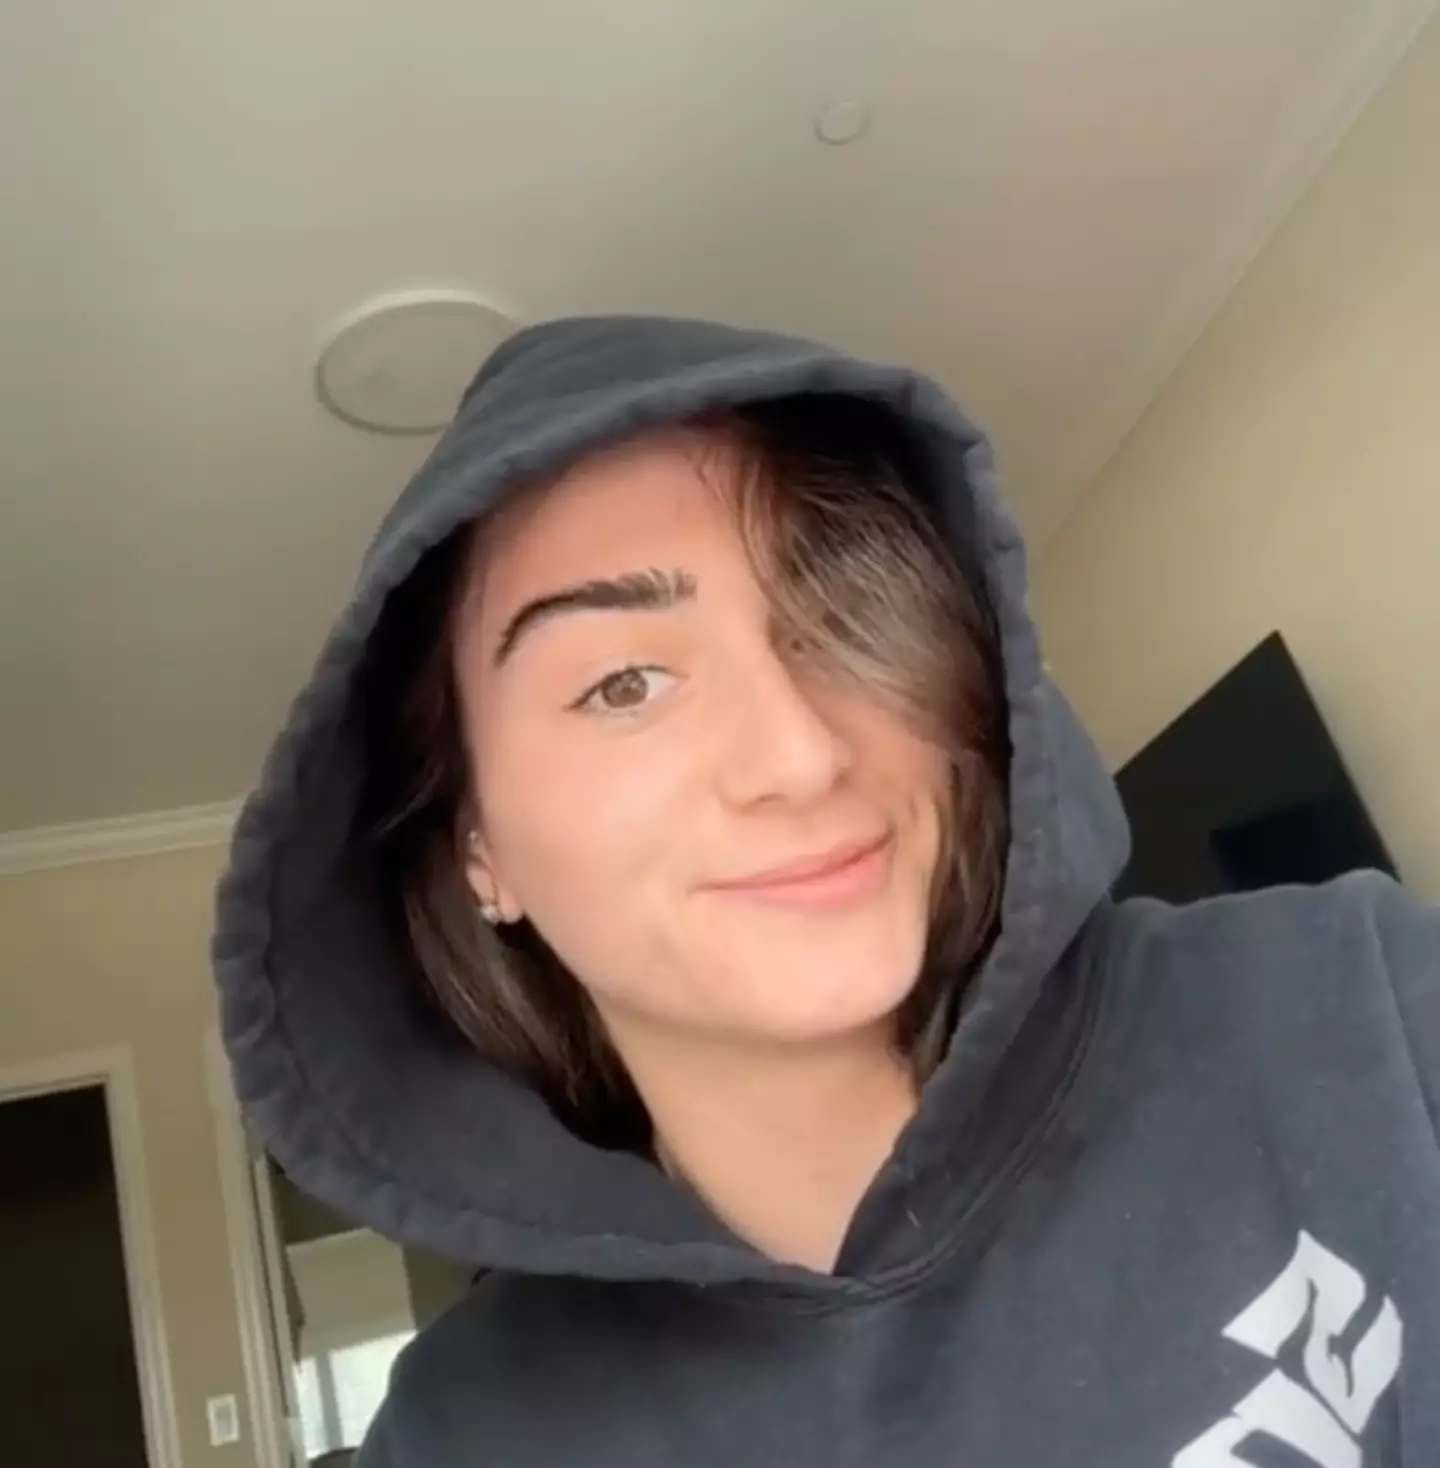 Gina posted the video to her TikTok.